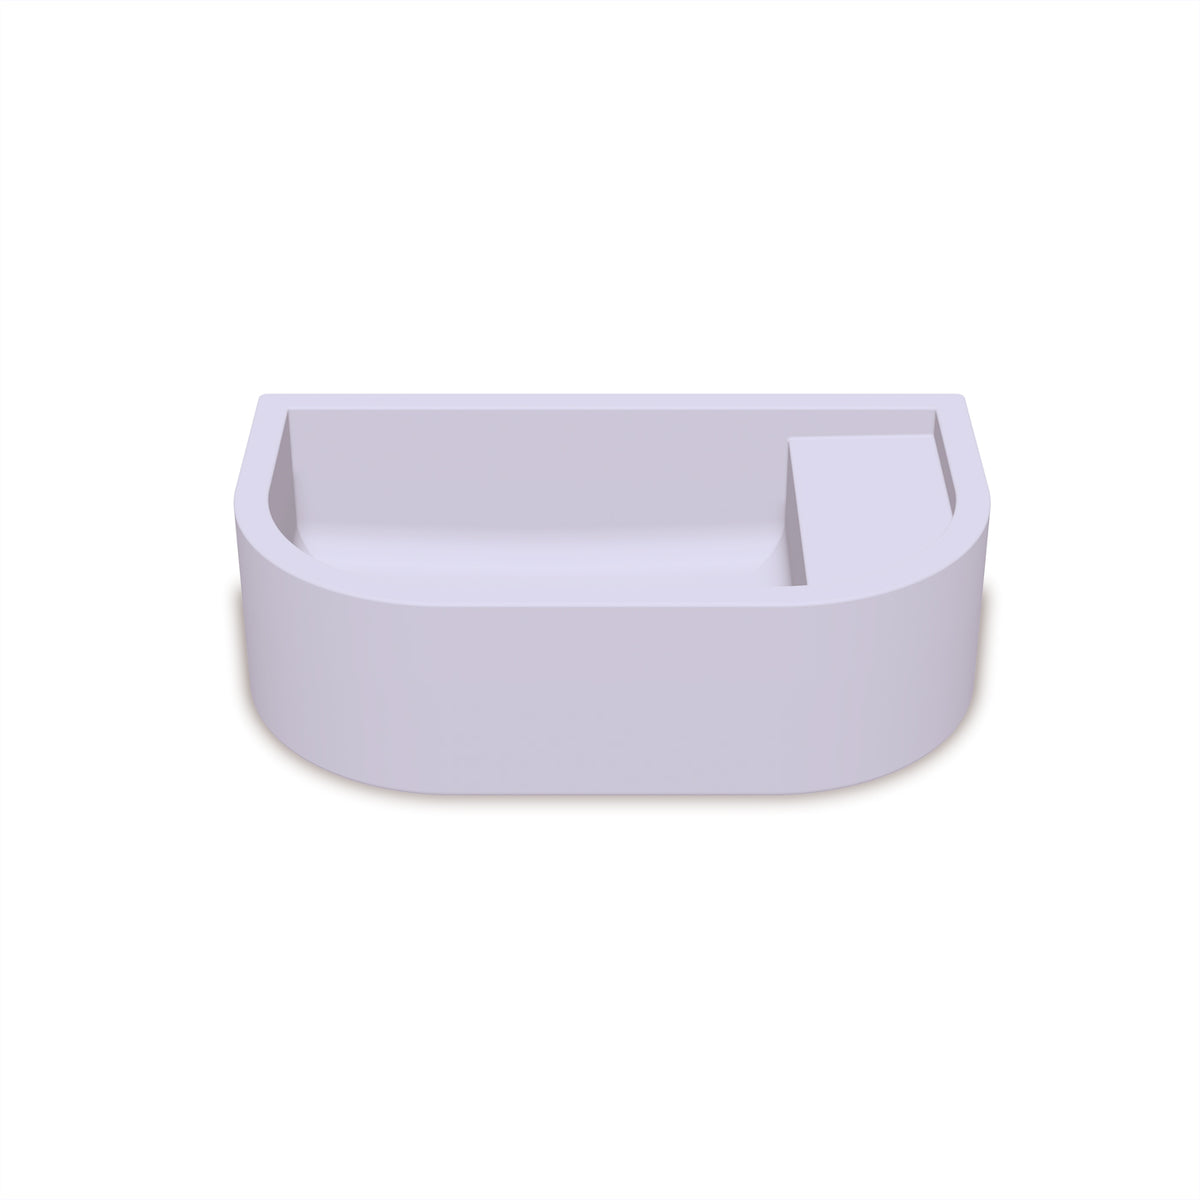 Loop 01 Basin - Overflow - Surface Mount (Lilac,No Tap Hole,Black)